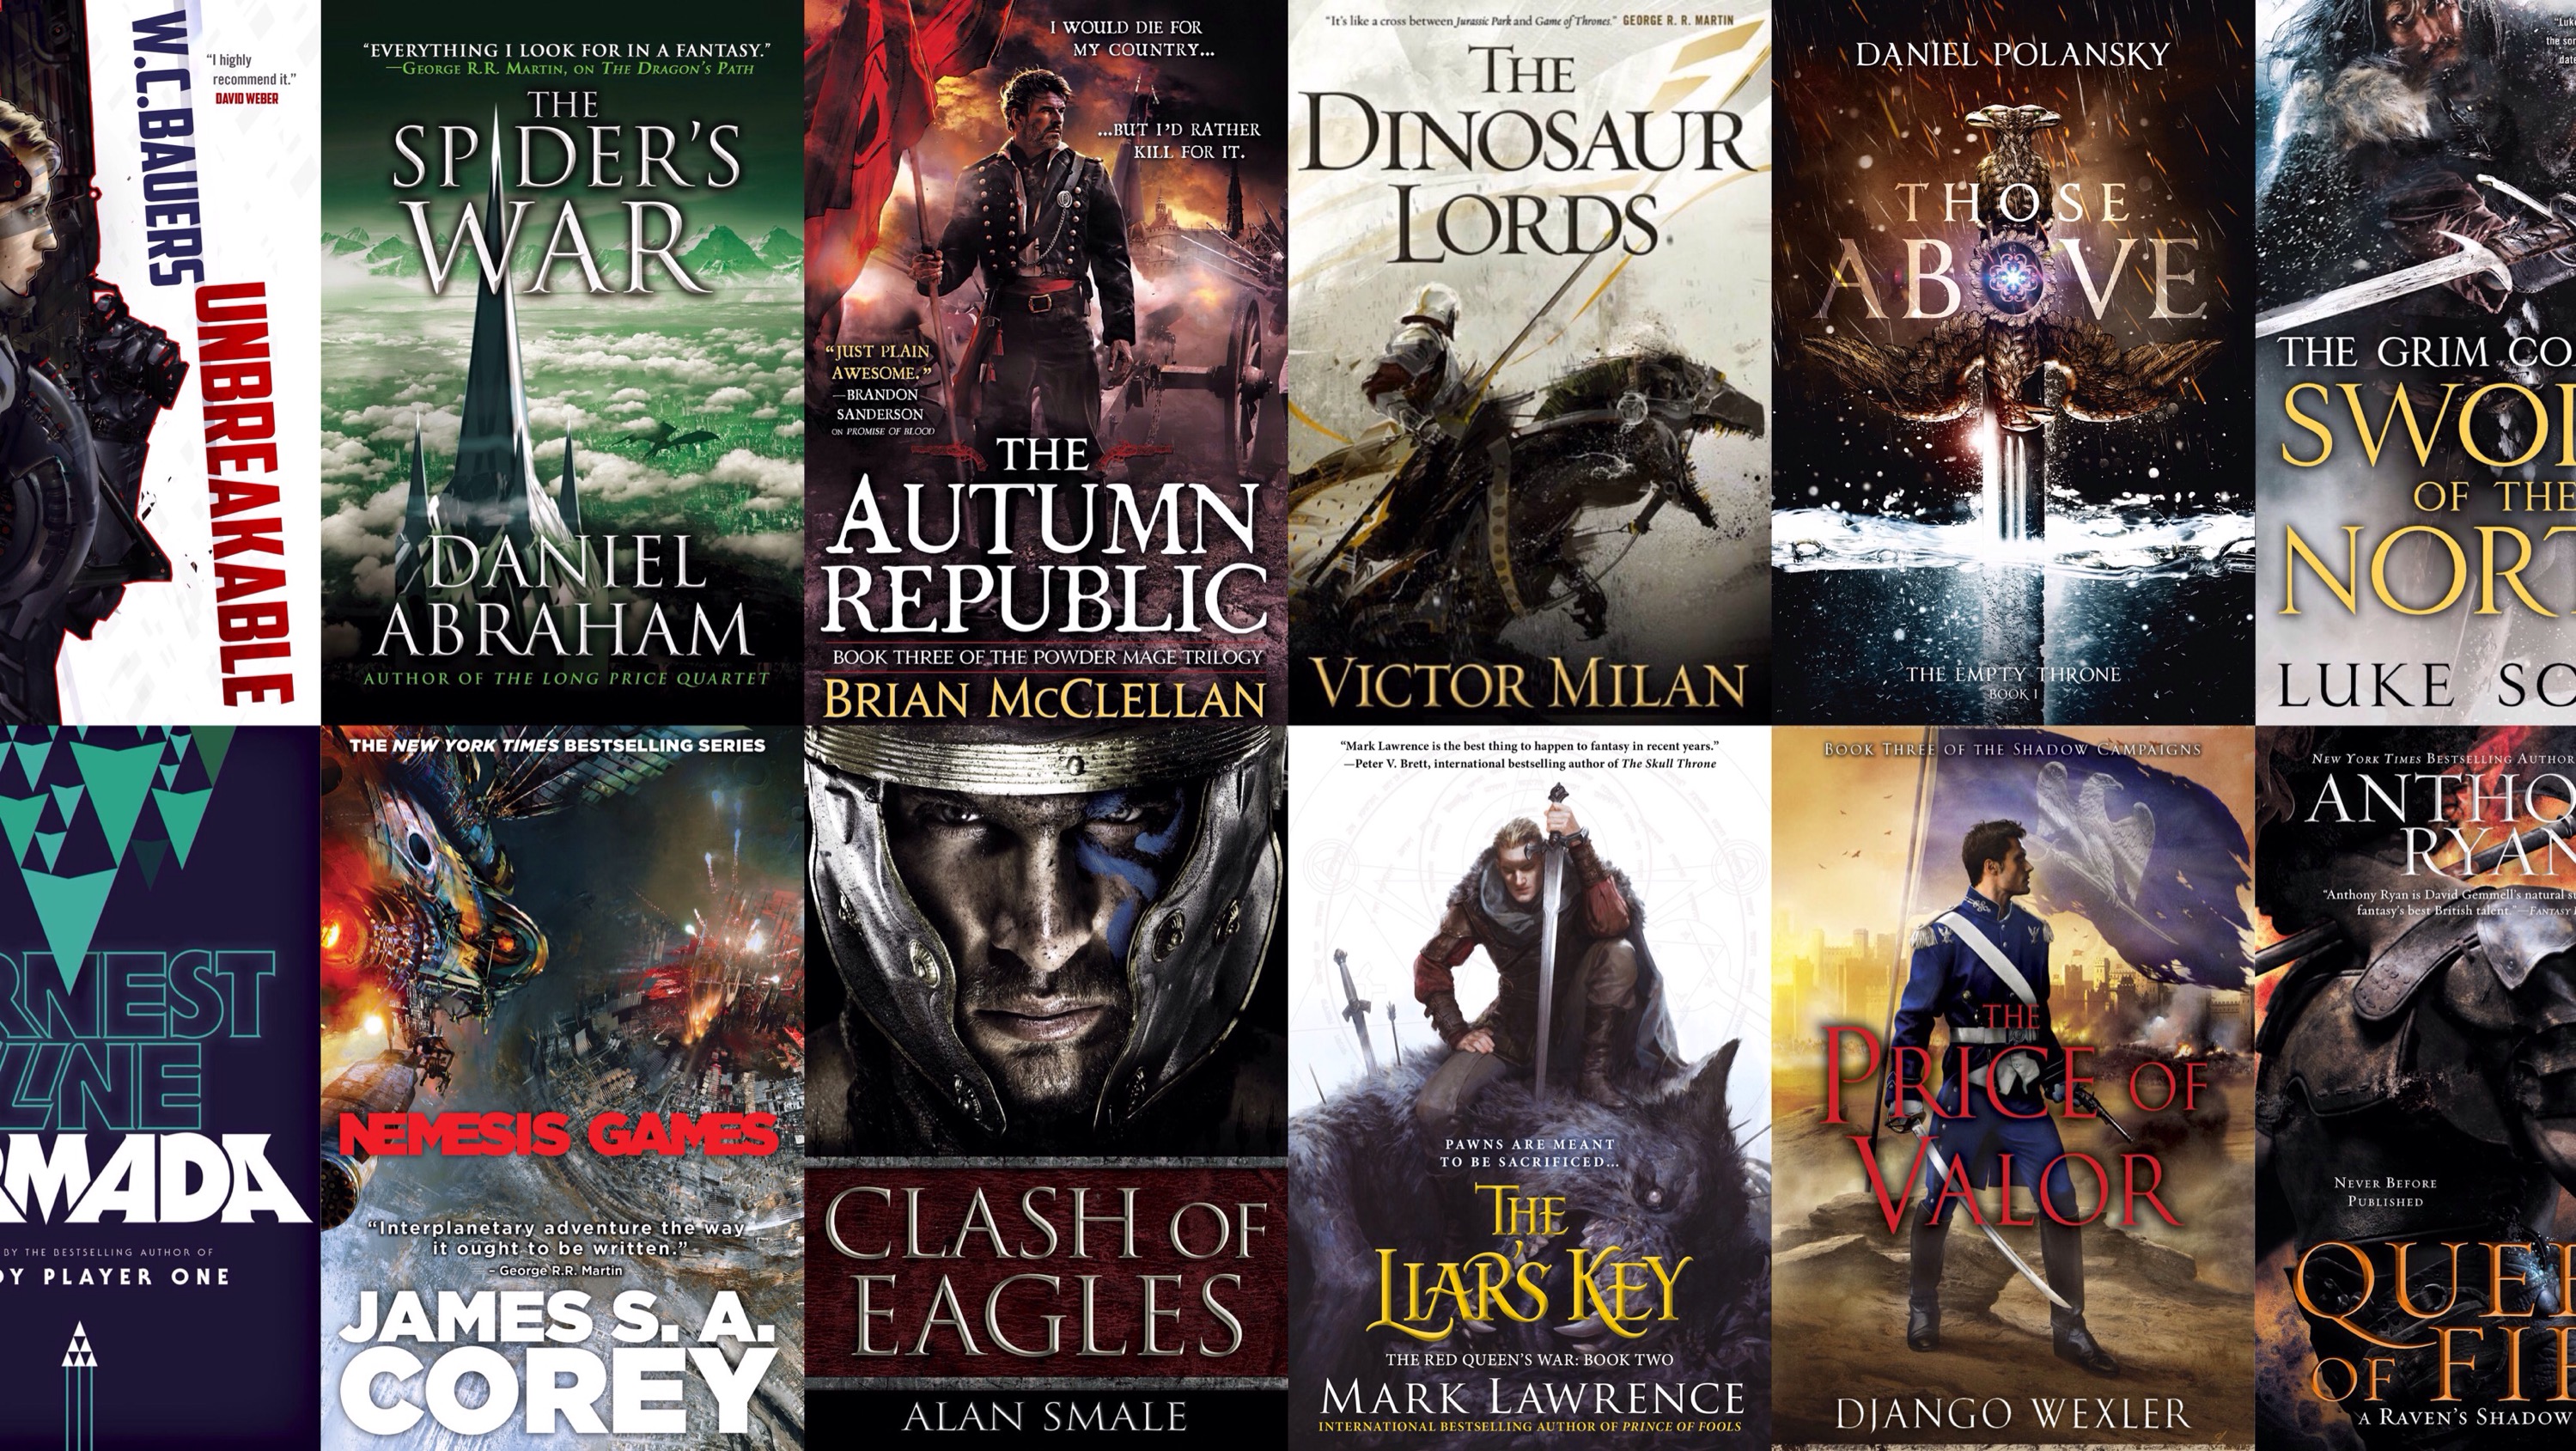 The 25 Most Anticipated Science Fiction & Fantasy Books of 2015